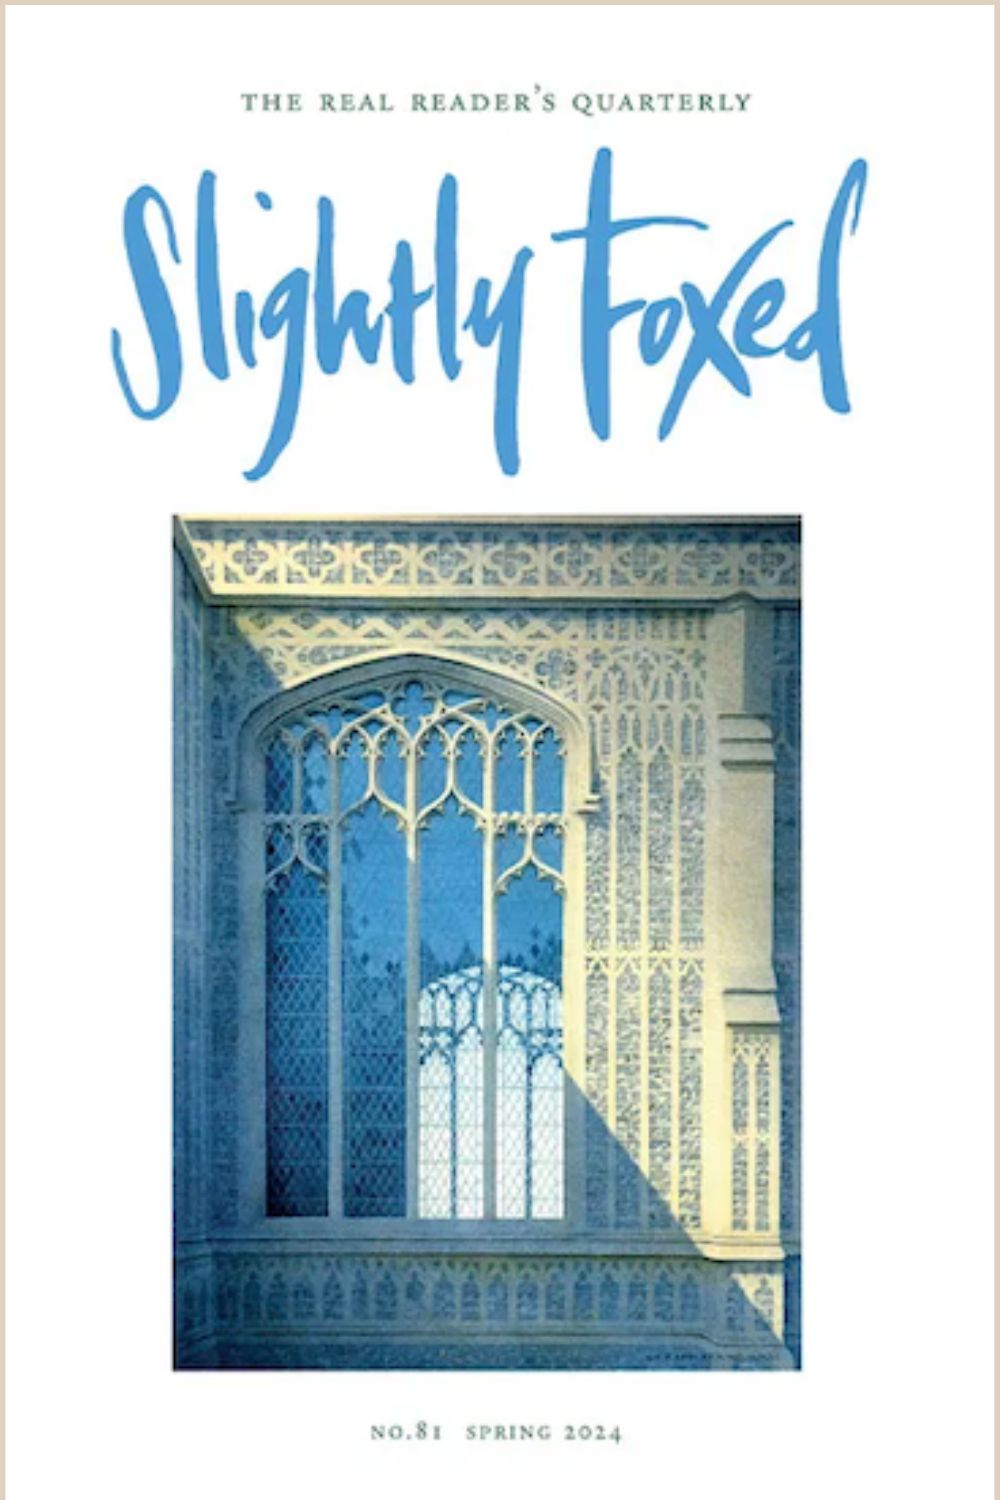 Slightly Foxed Magazine Issue 81 cover 